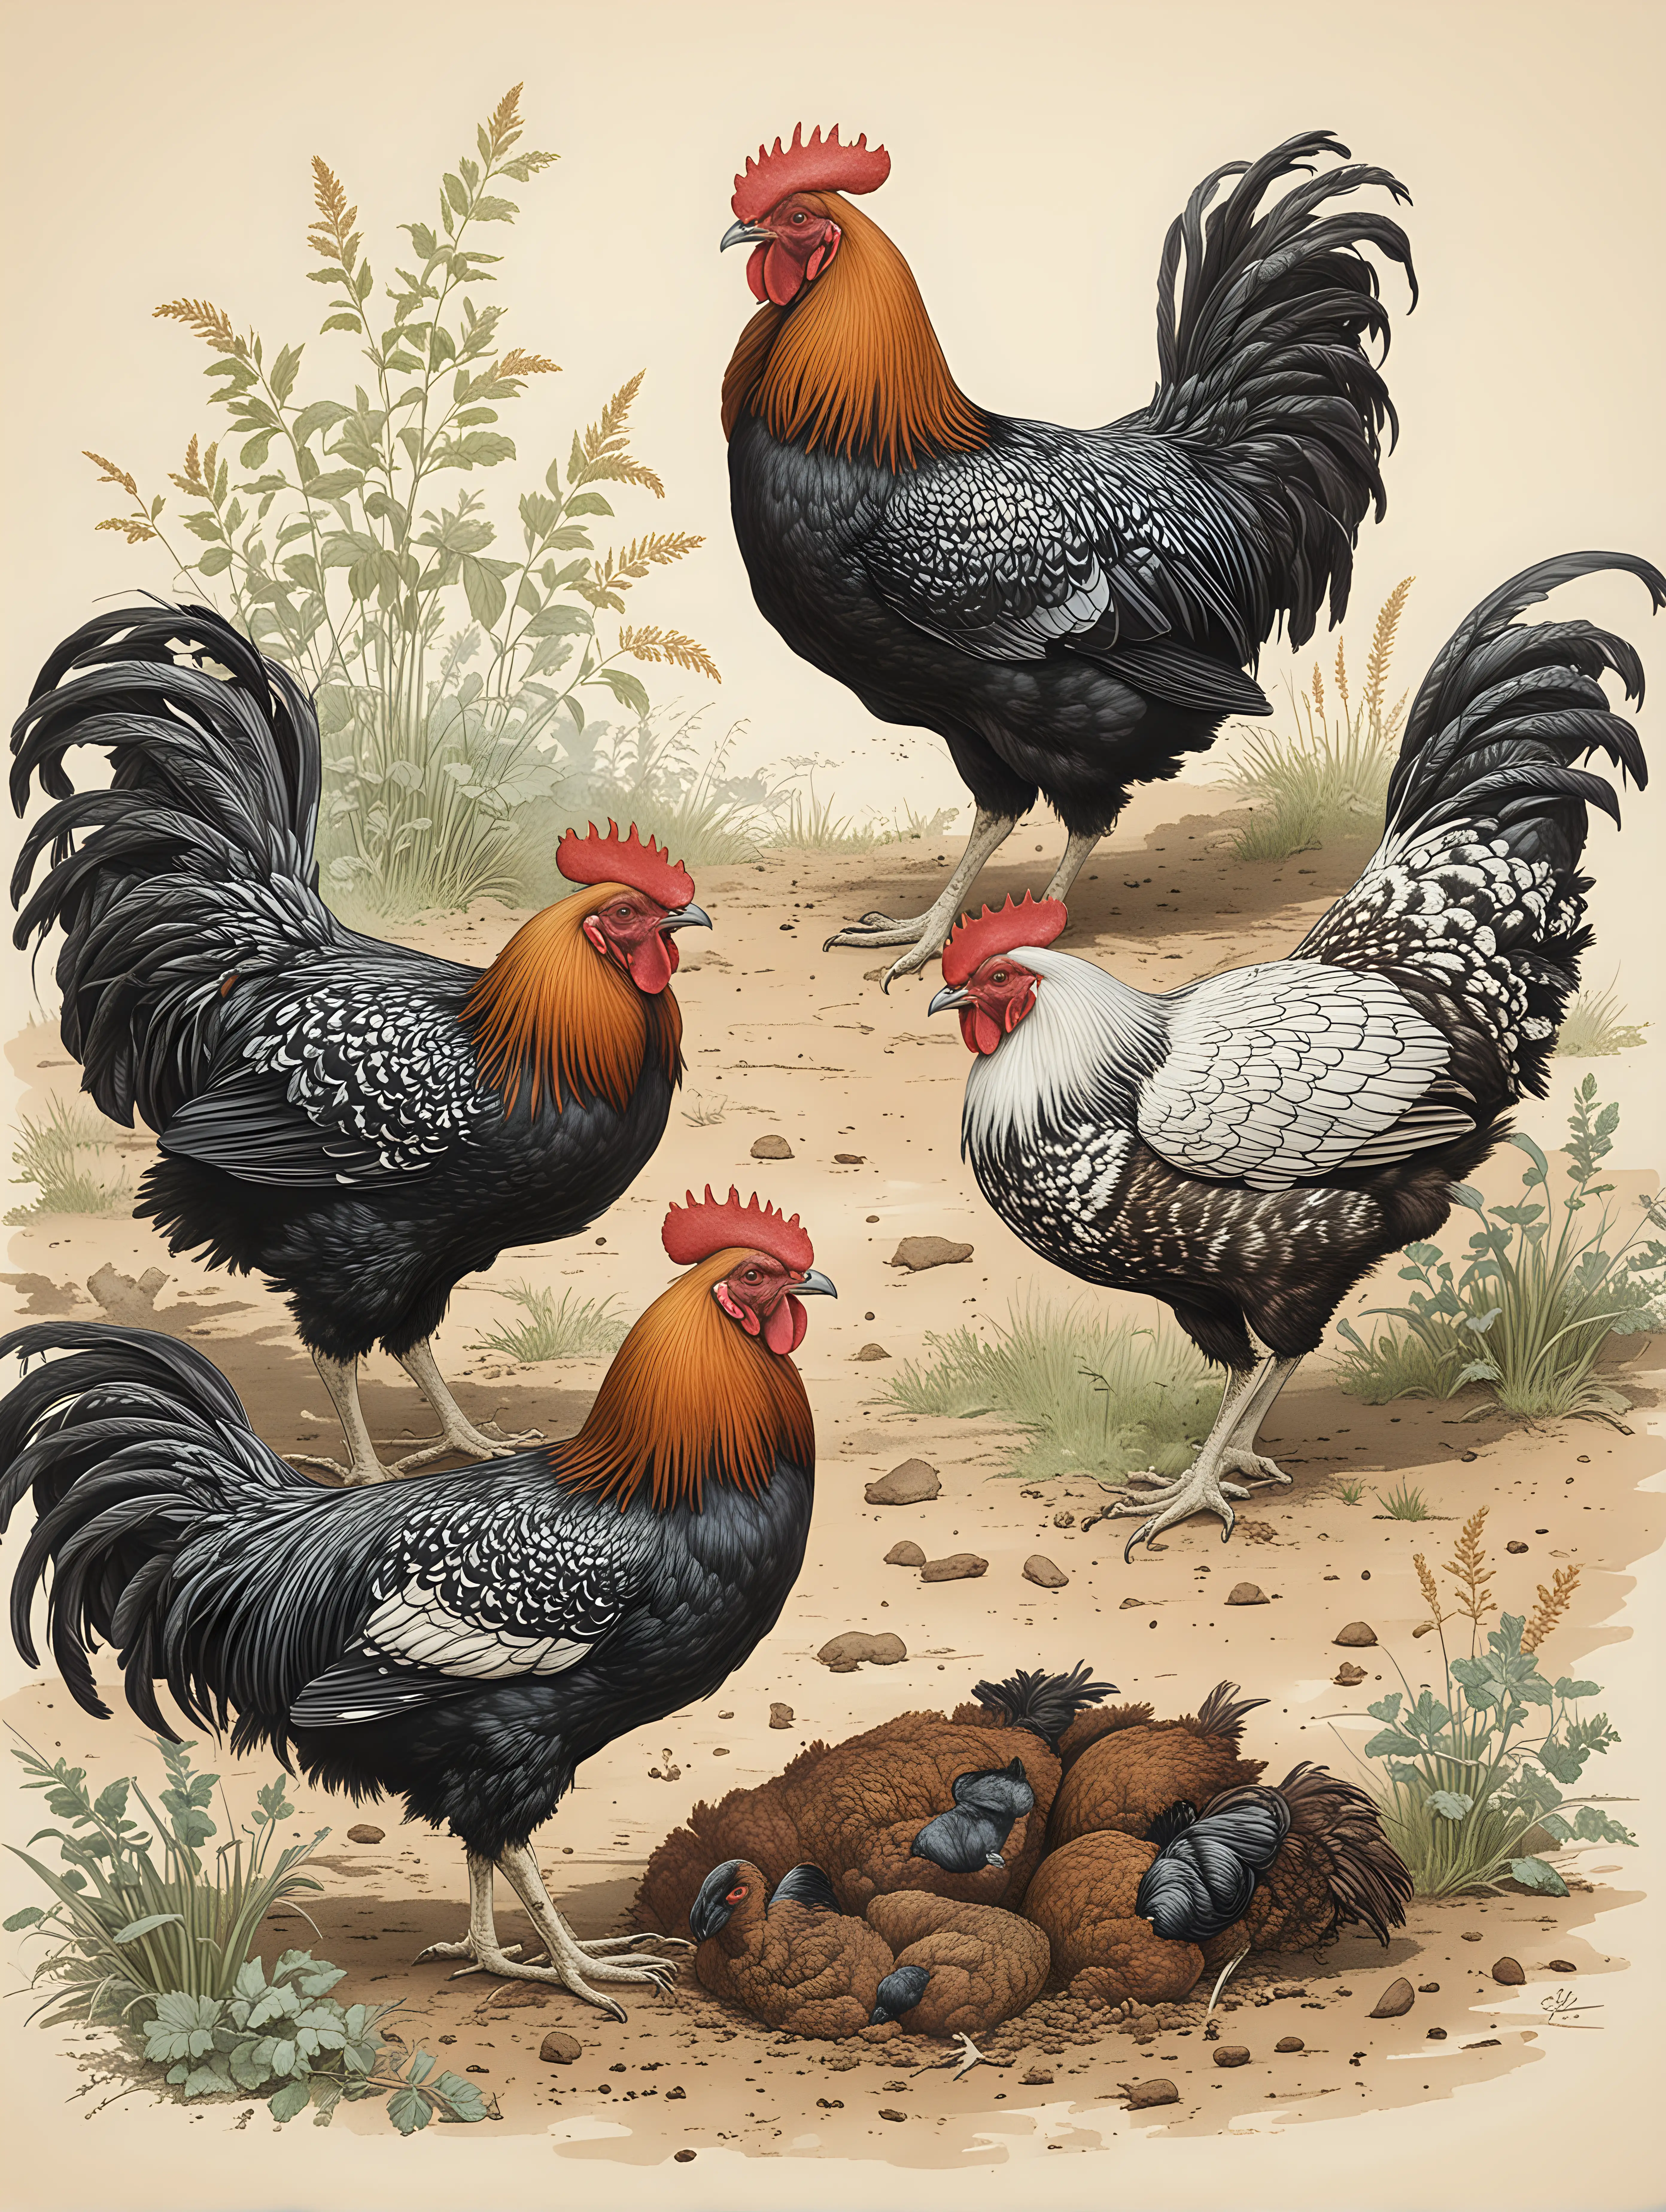 Audubon Style Illustration of American Roosters and Black Hens Pecking Ground